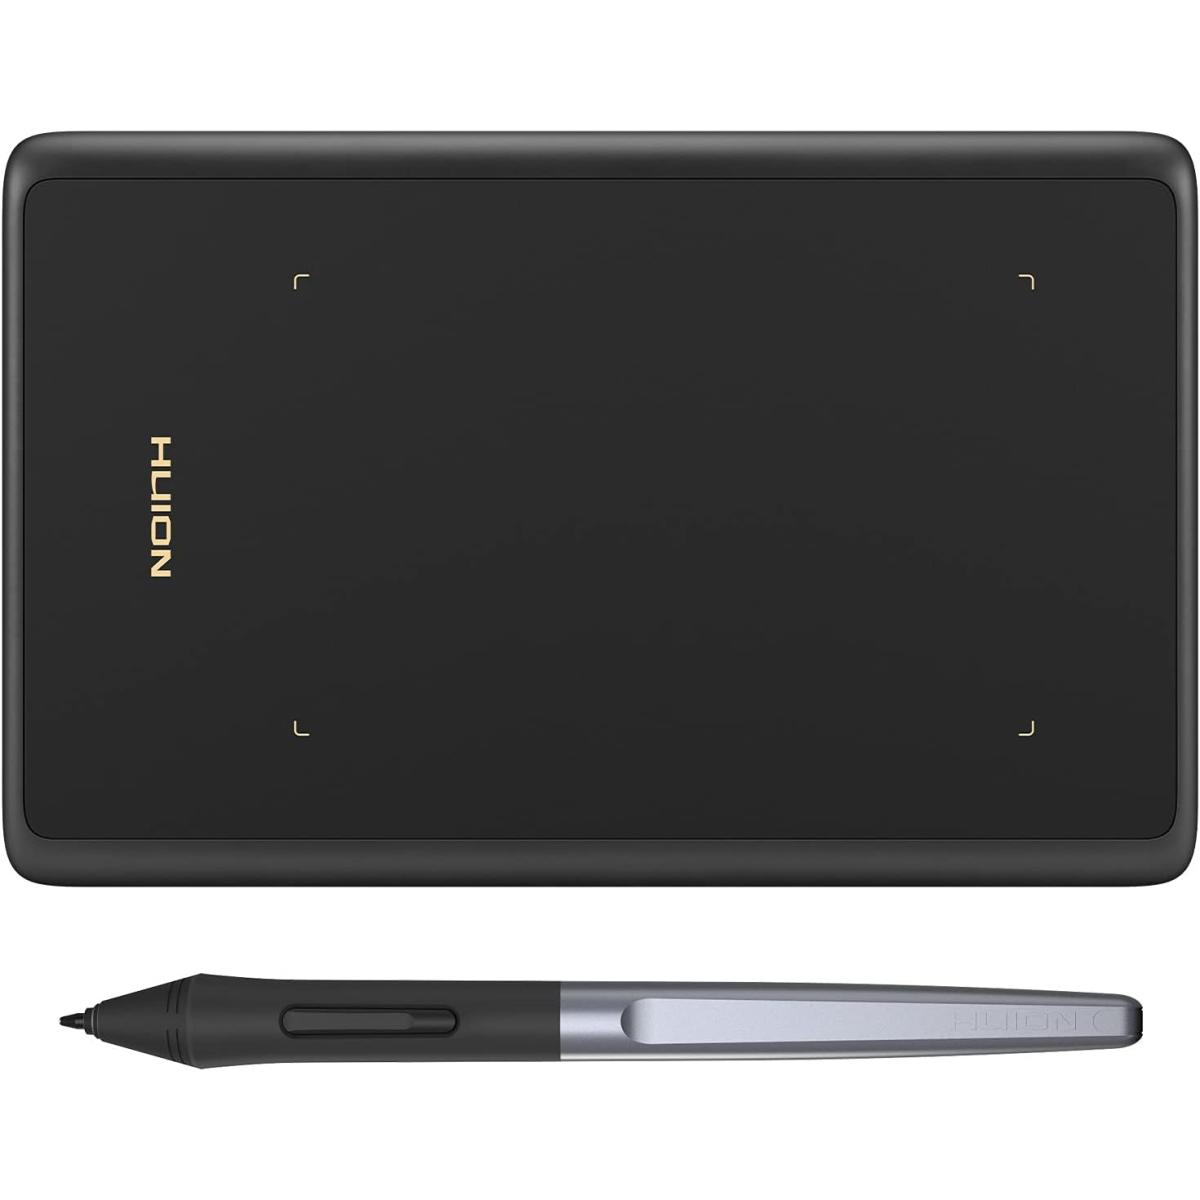 HUION H420X OSU Tablet Graphics Drawing Pen Tablet with Digital Stylus - Compatible with Window/Mac/Linux/Android